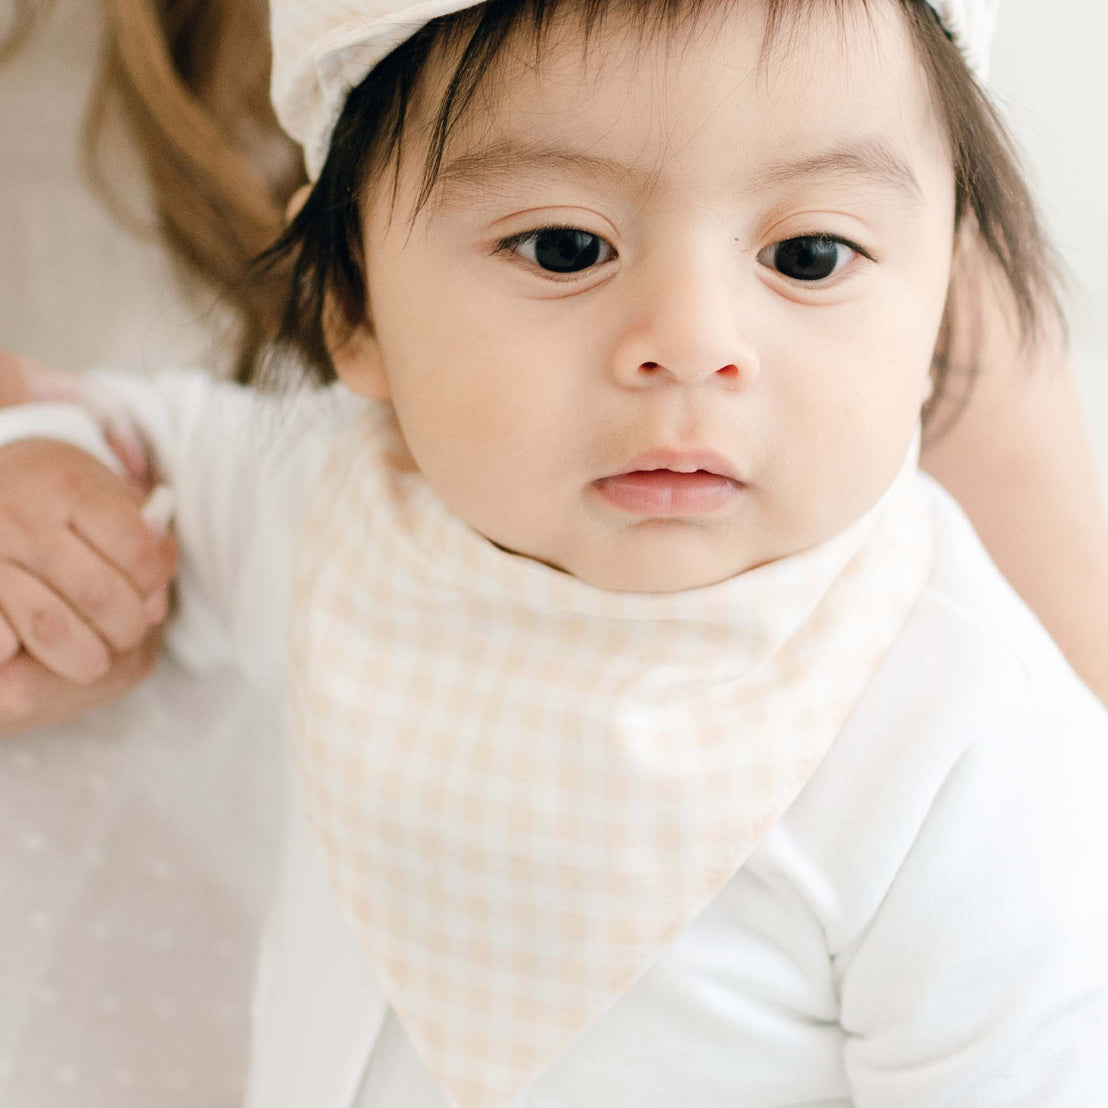 Close-up view of a baby dressed in a designer white outfit with an Ian Bandana Bib and white bonnet, looking directly at the camera with a soft focus background.